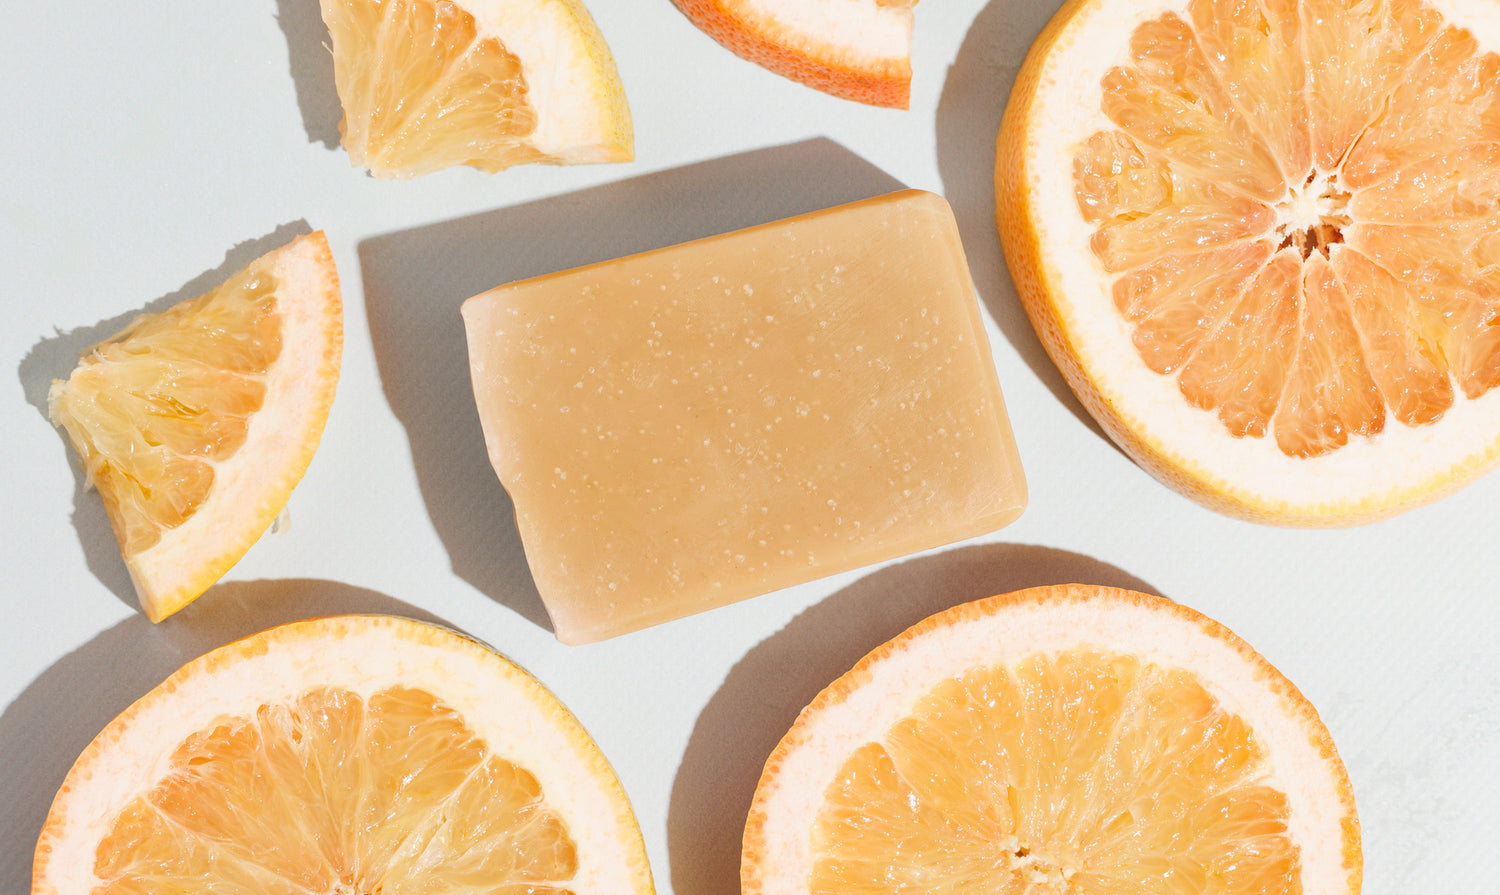 Bar of soap laying flat with slices of grapefruit